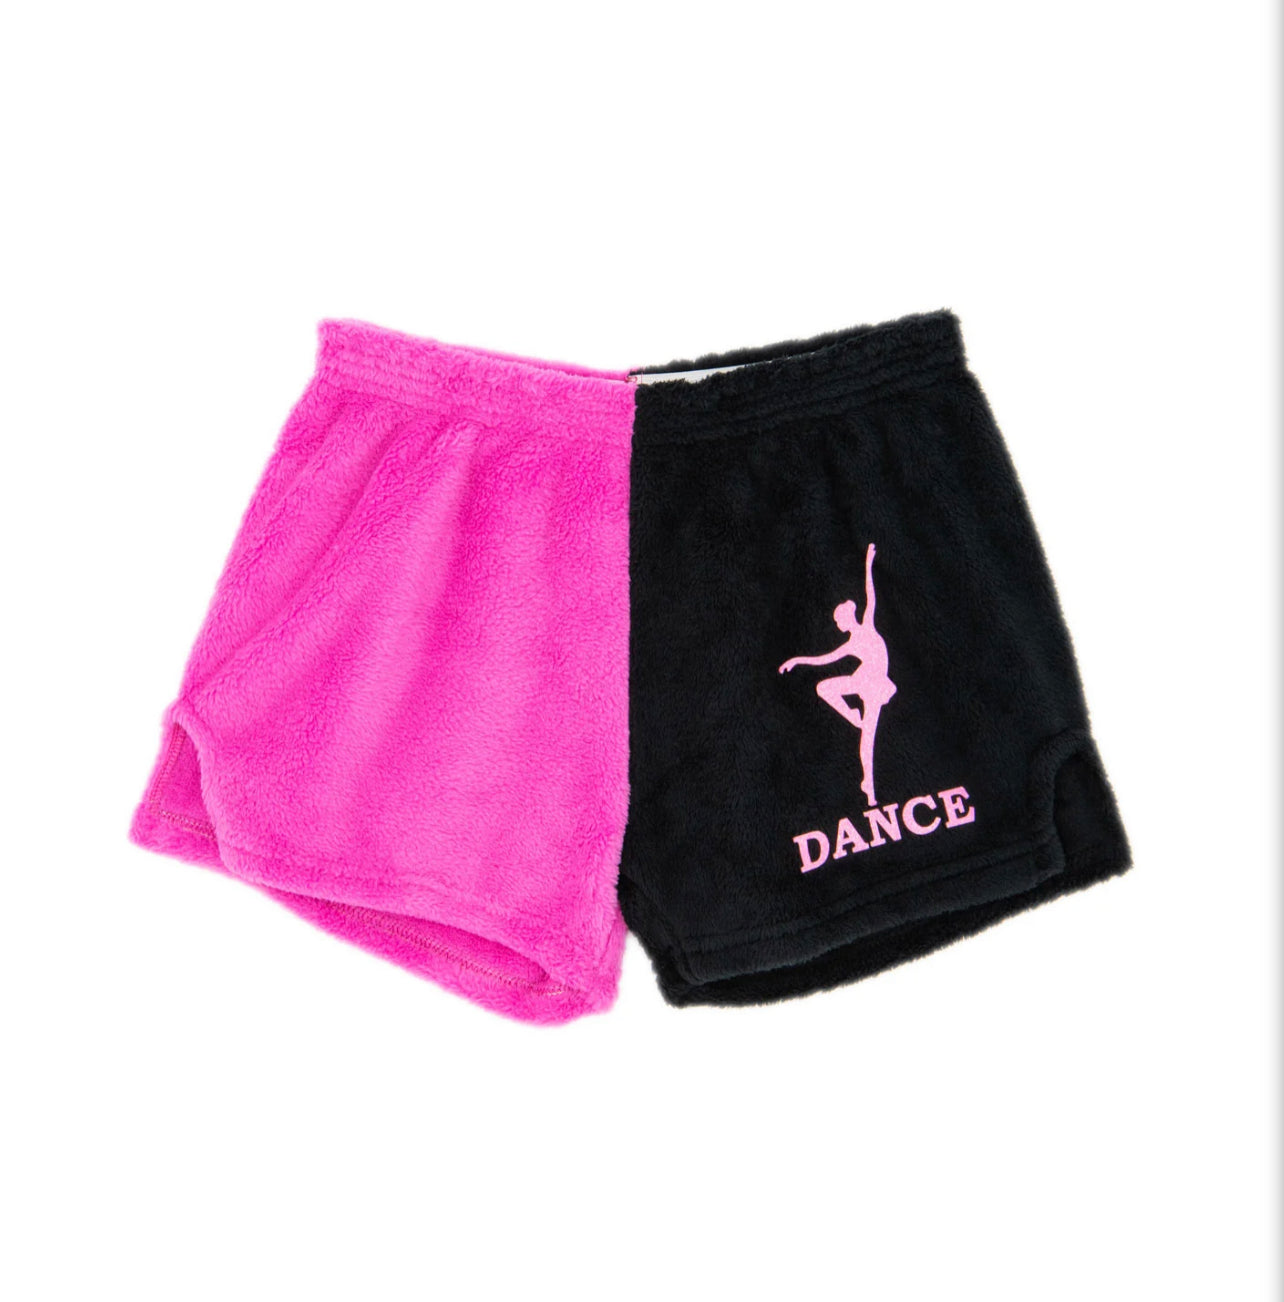 Made with Love and Kisses Girls Dance Shorts